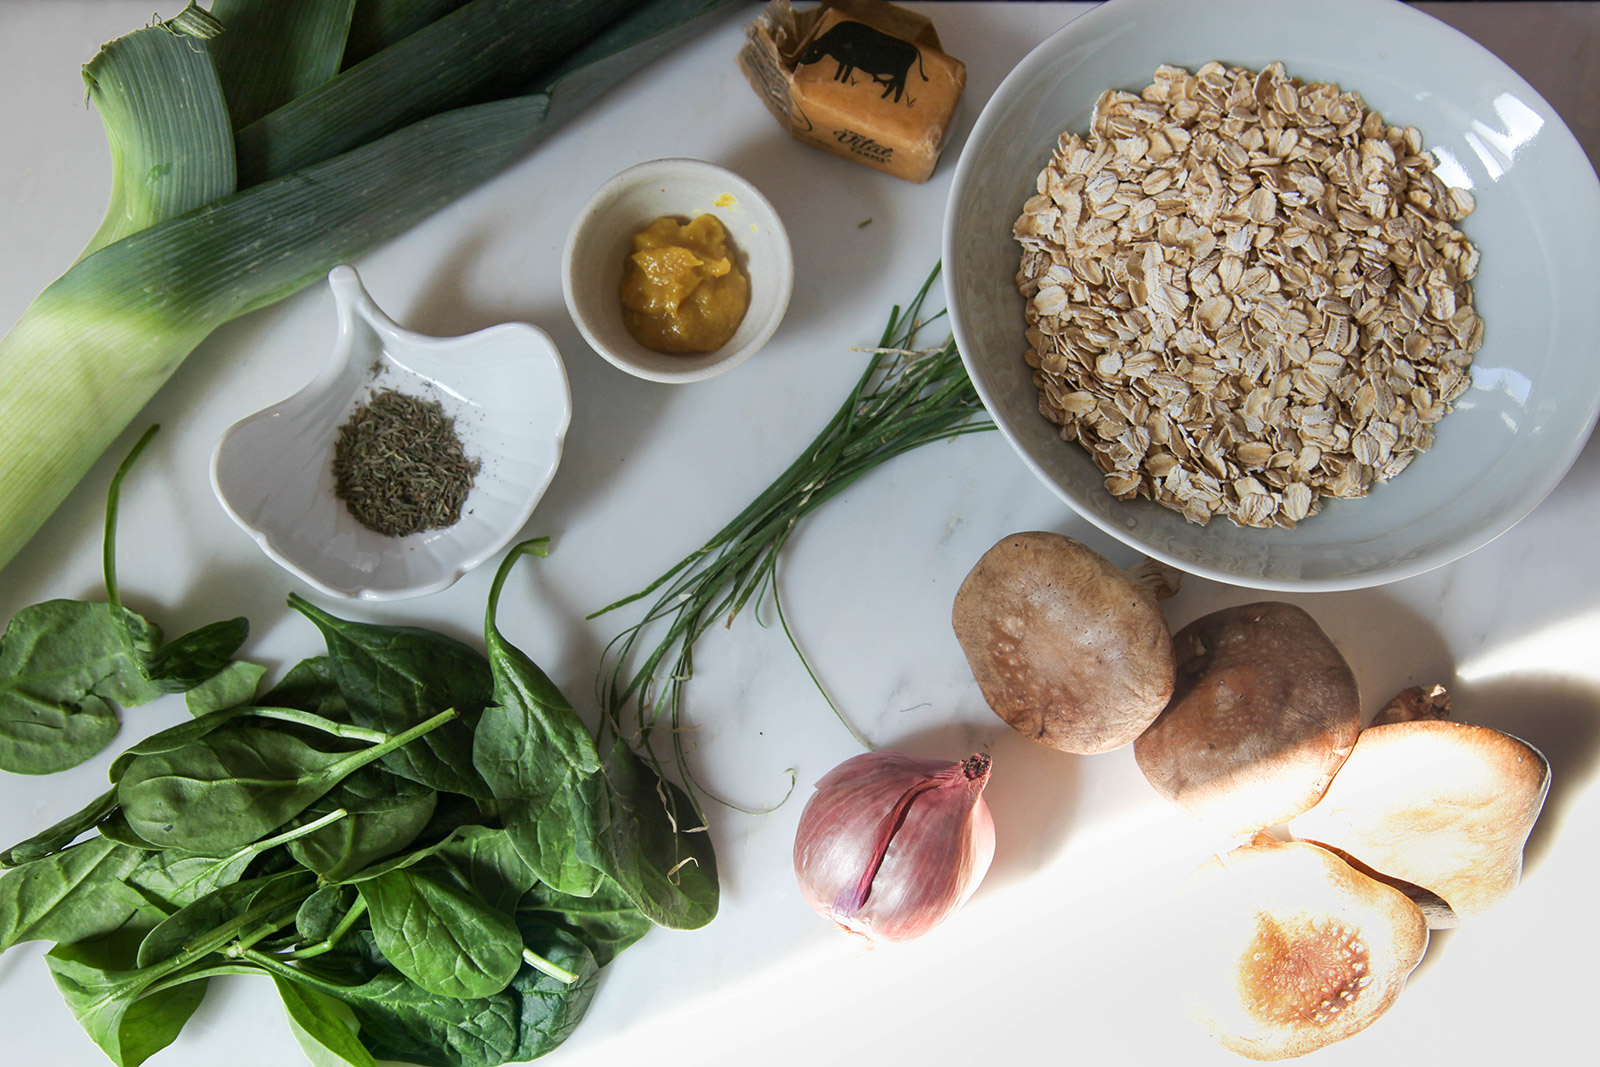 Ingredients for Savory Oatmeal with leeks, shiitake mushrooms, and spinach